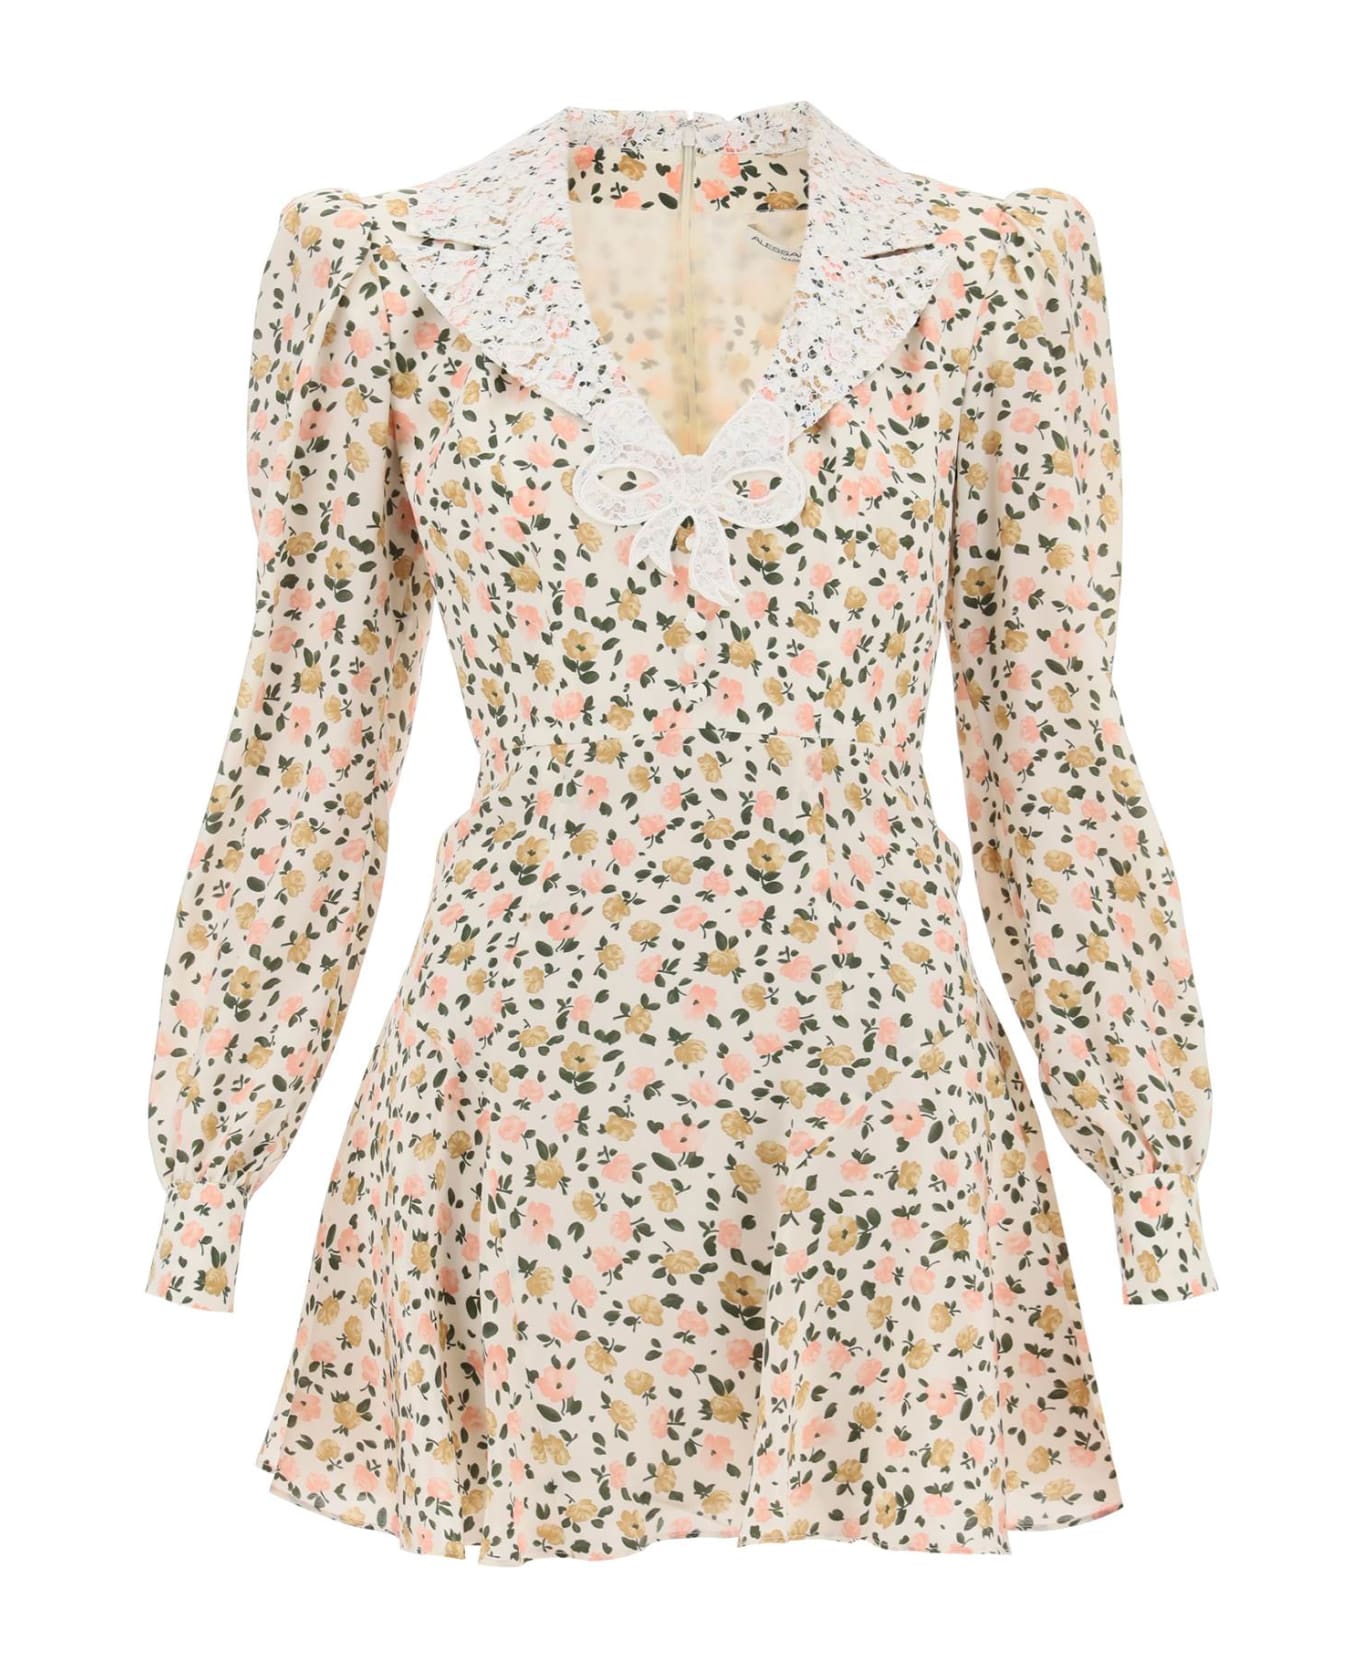 Alessandra Rich Lace Collar Floral Printed Dress - PINK MULTI (White)